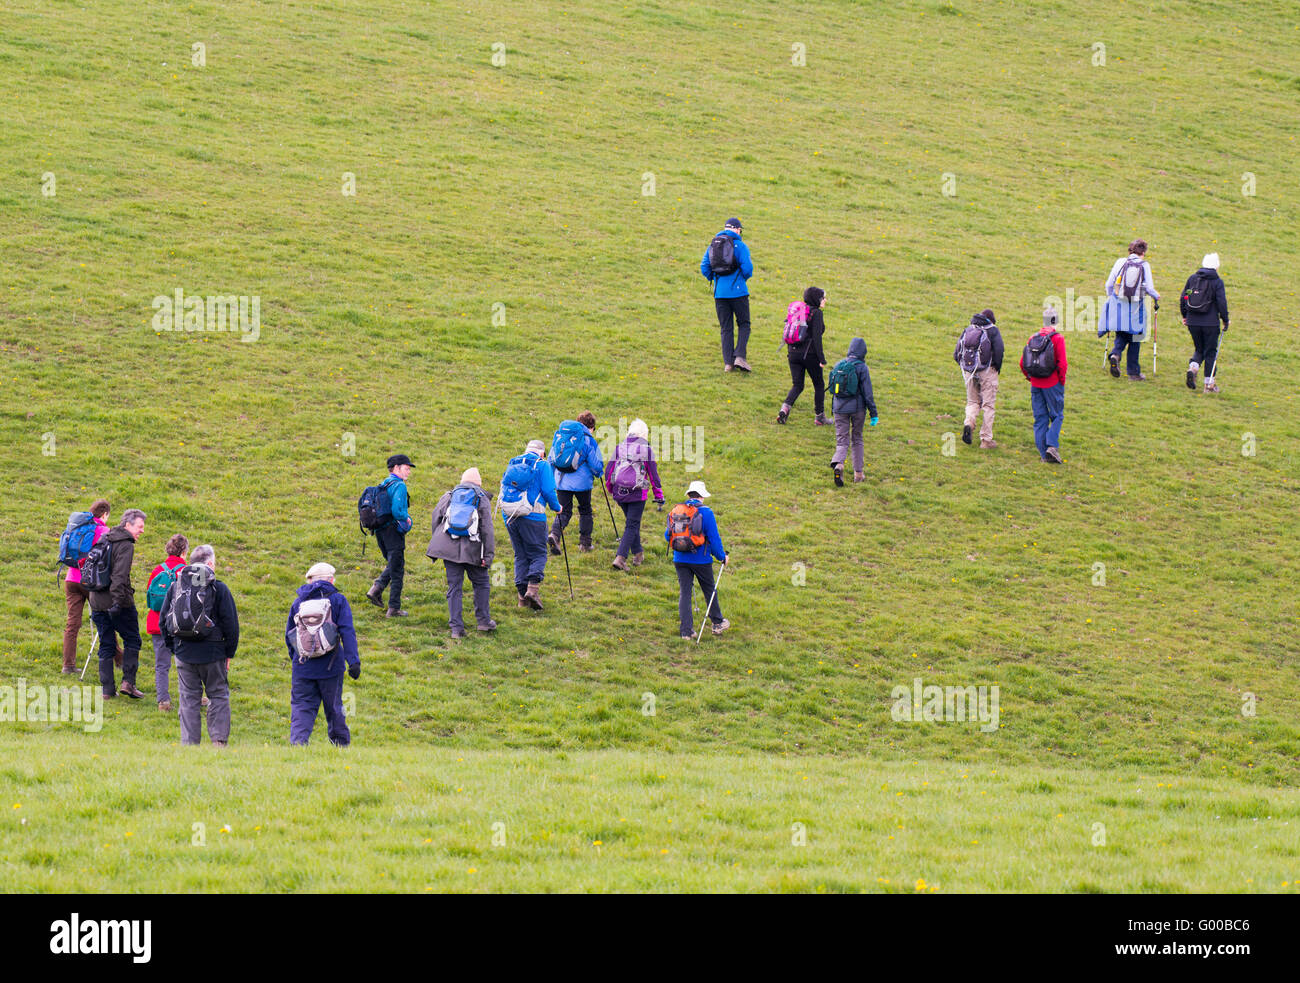 A group of walkers in a field near Cardington in Shropshire, England, UK. Stock Photo